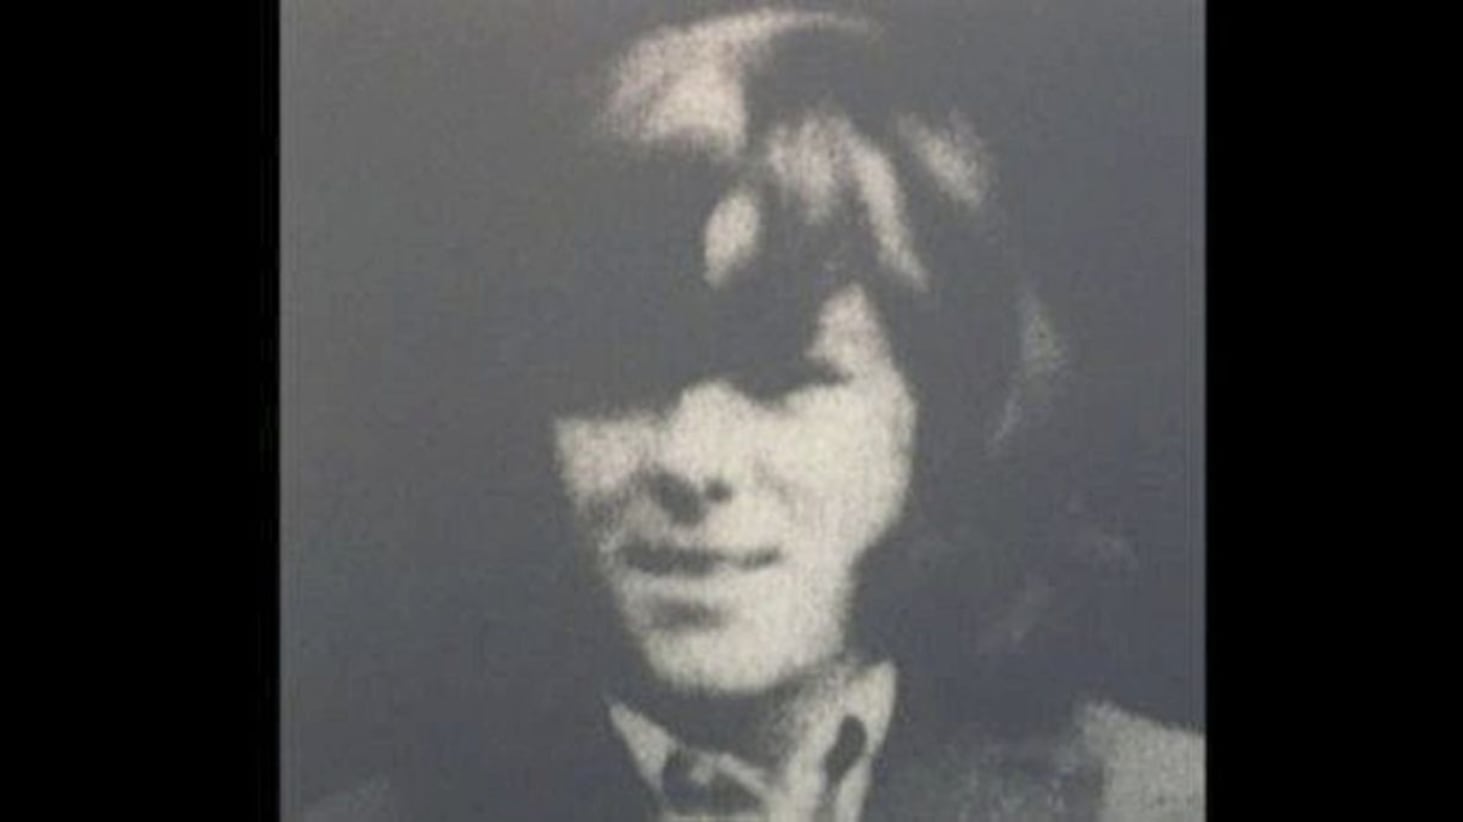 Francis Rice was killed in May 1975. Picture by BBC